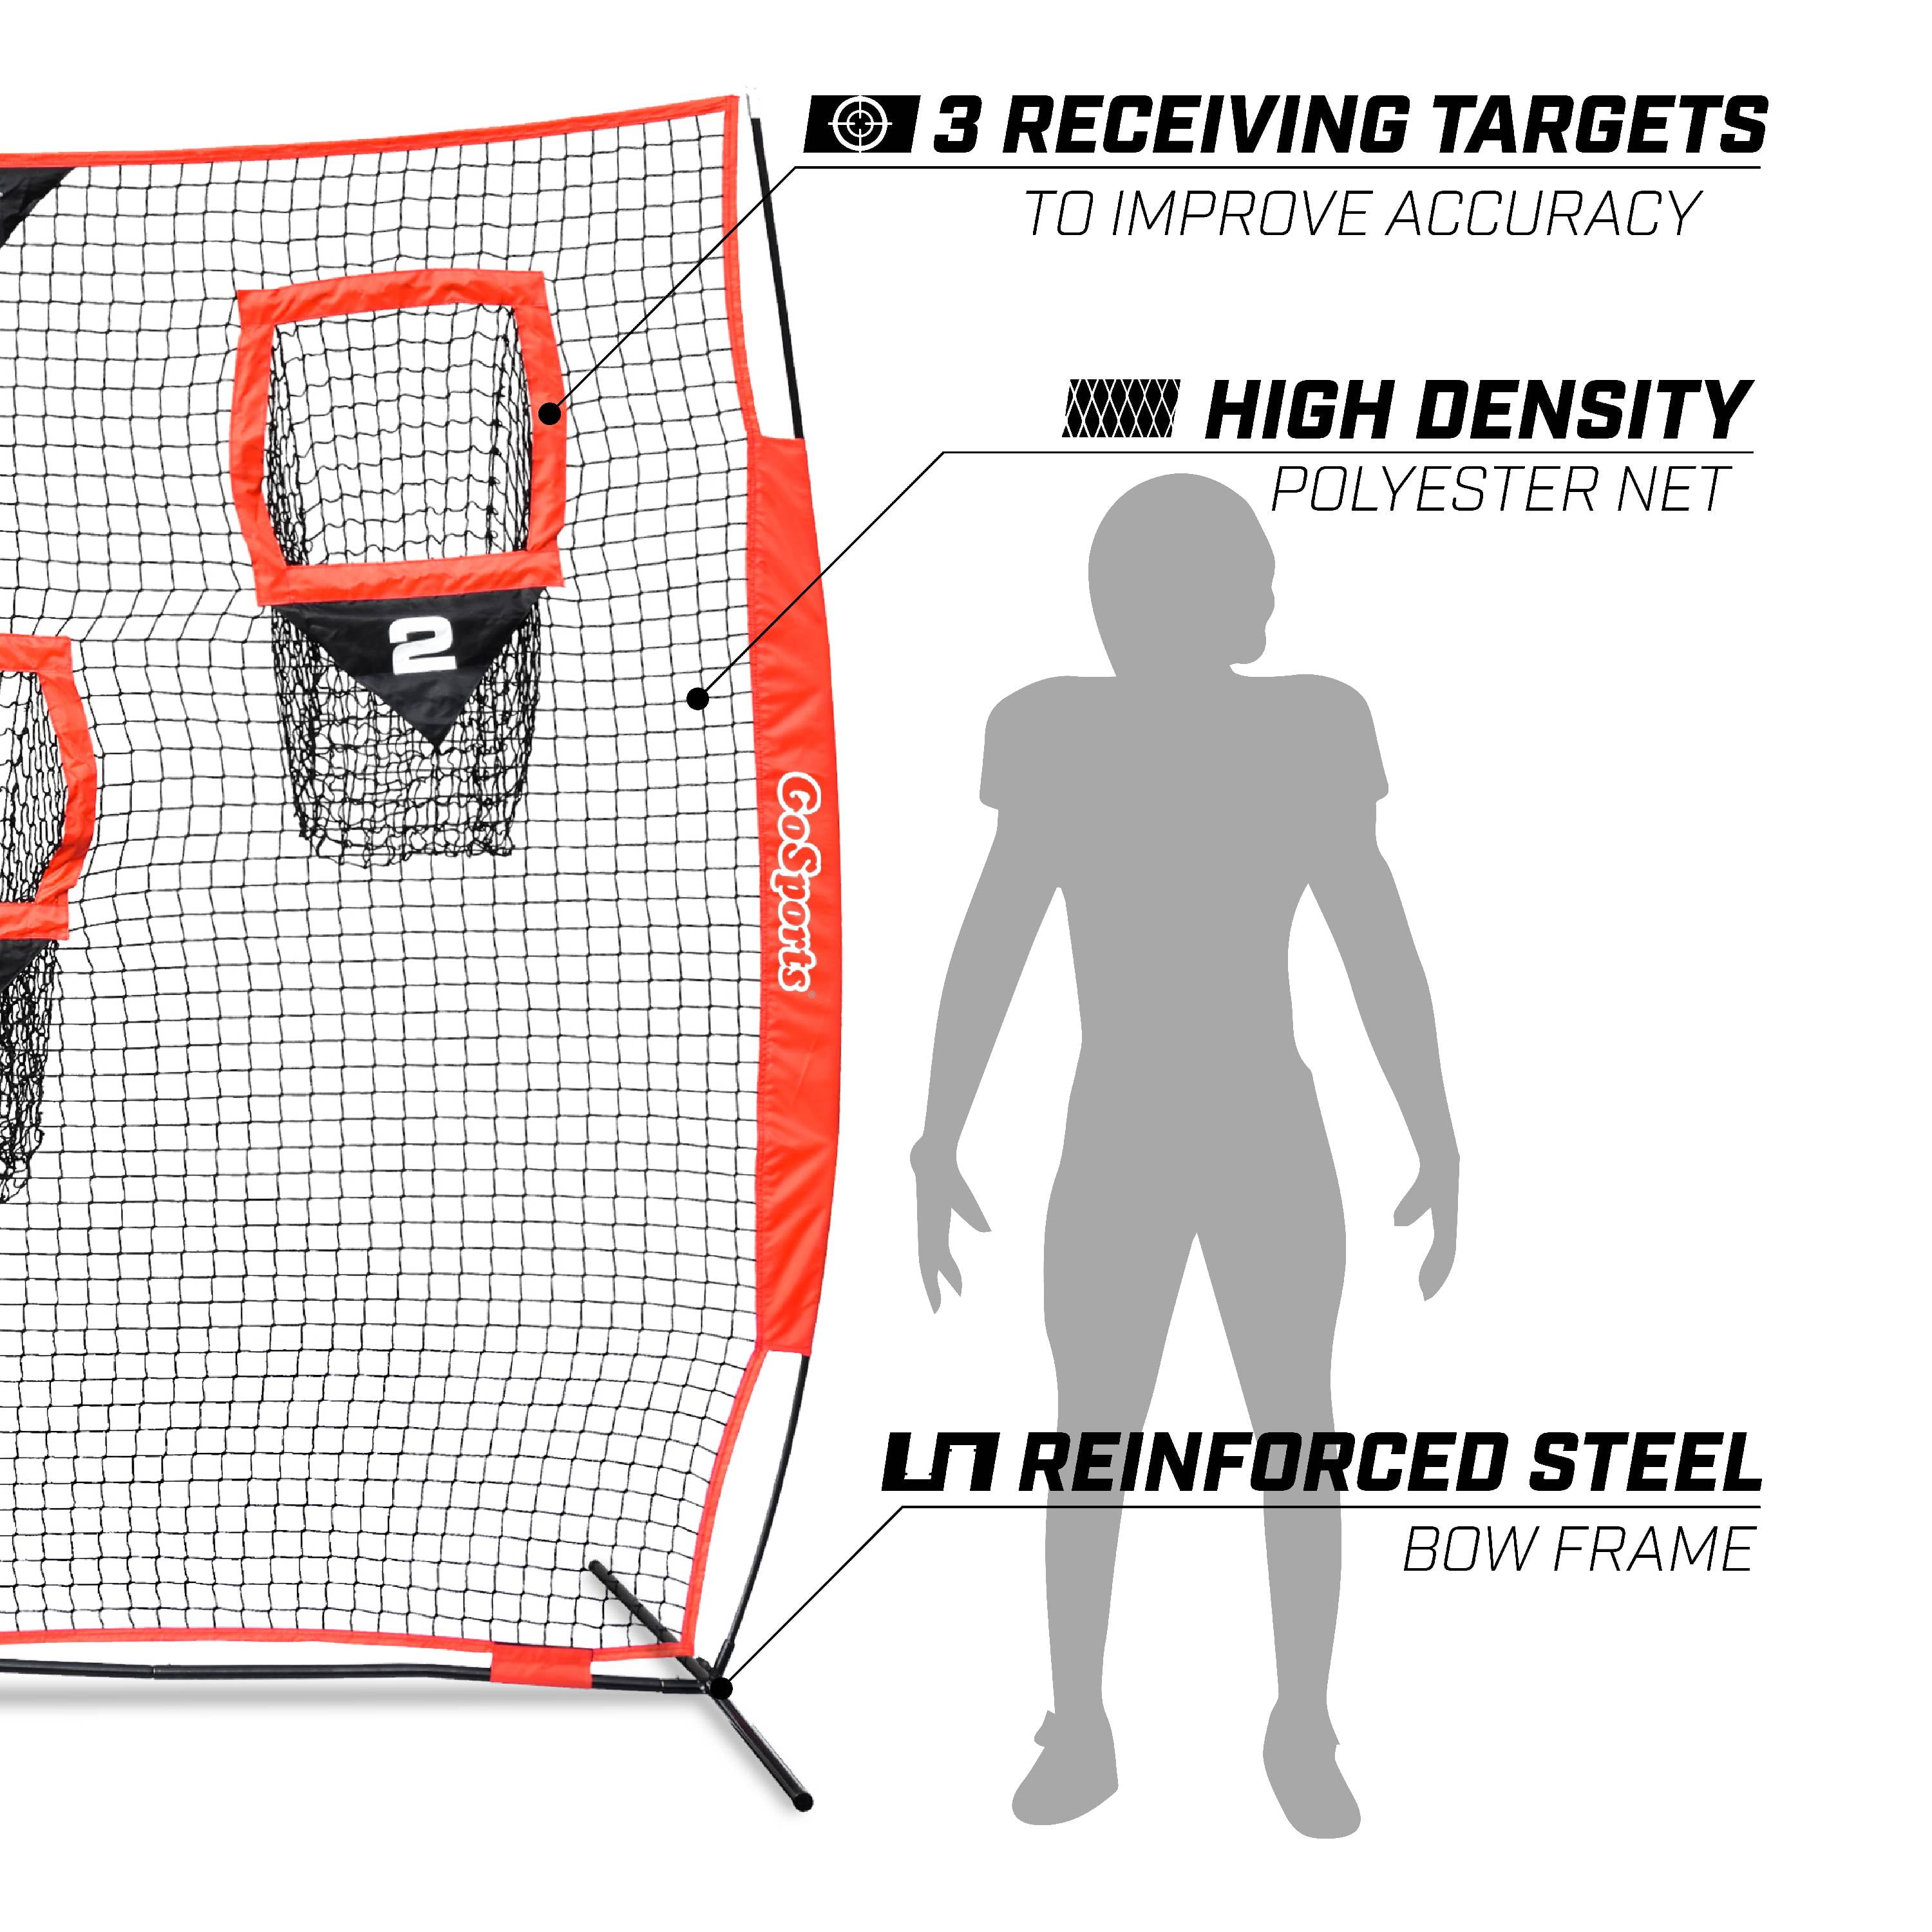 Details about   Portable Football Trainer Throwing Net Set for Improving QB Throwing Accuracy US 